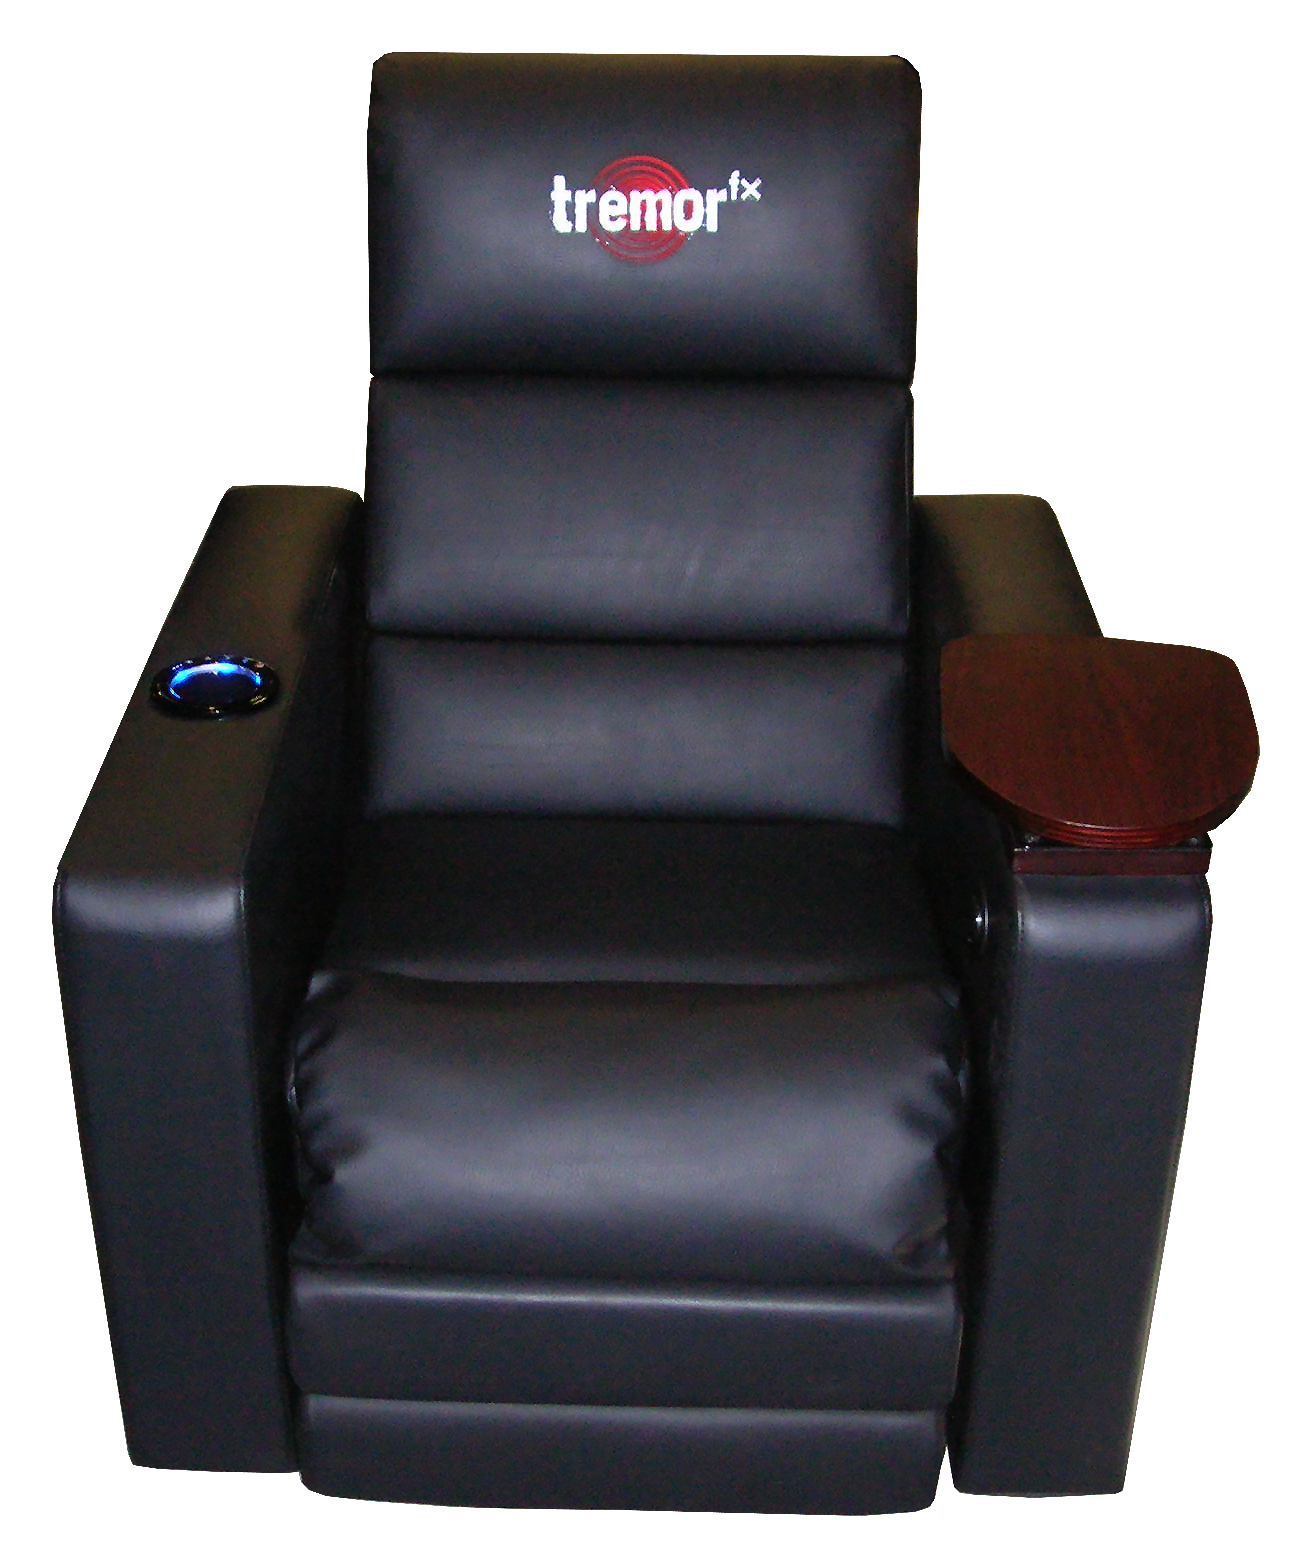 TremorFX Home Theater Seating by RedSeat Entertainment Brings the Sound to Your Seat